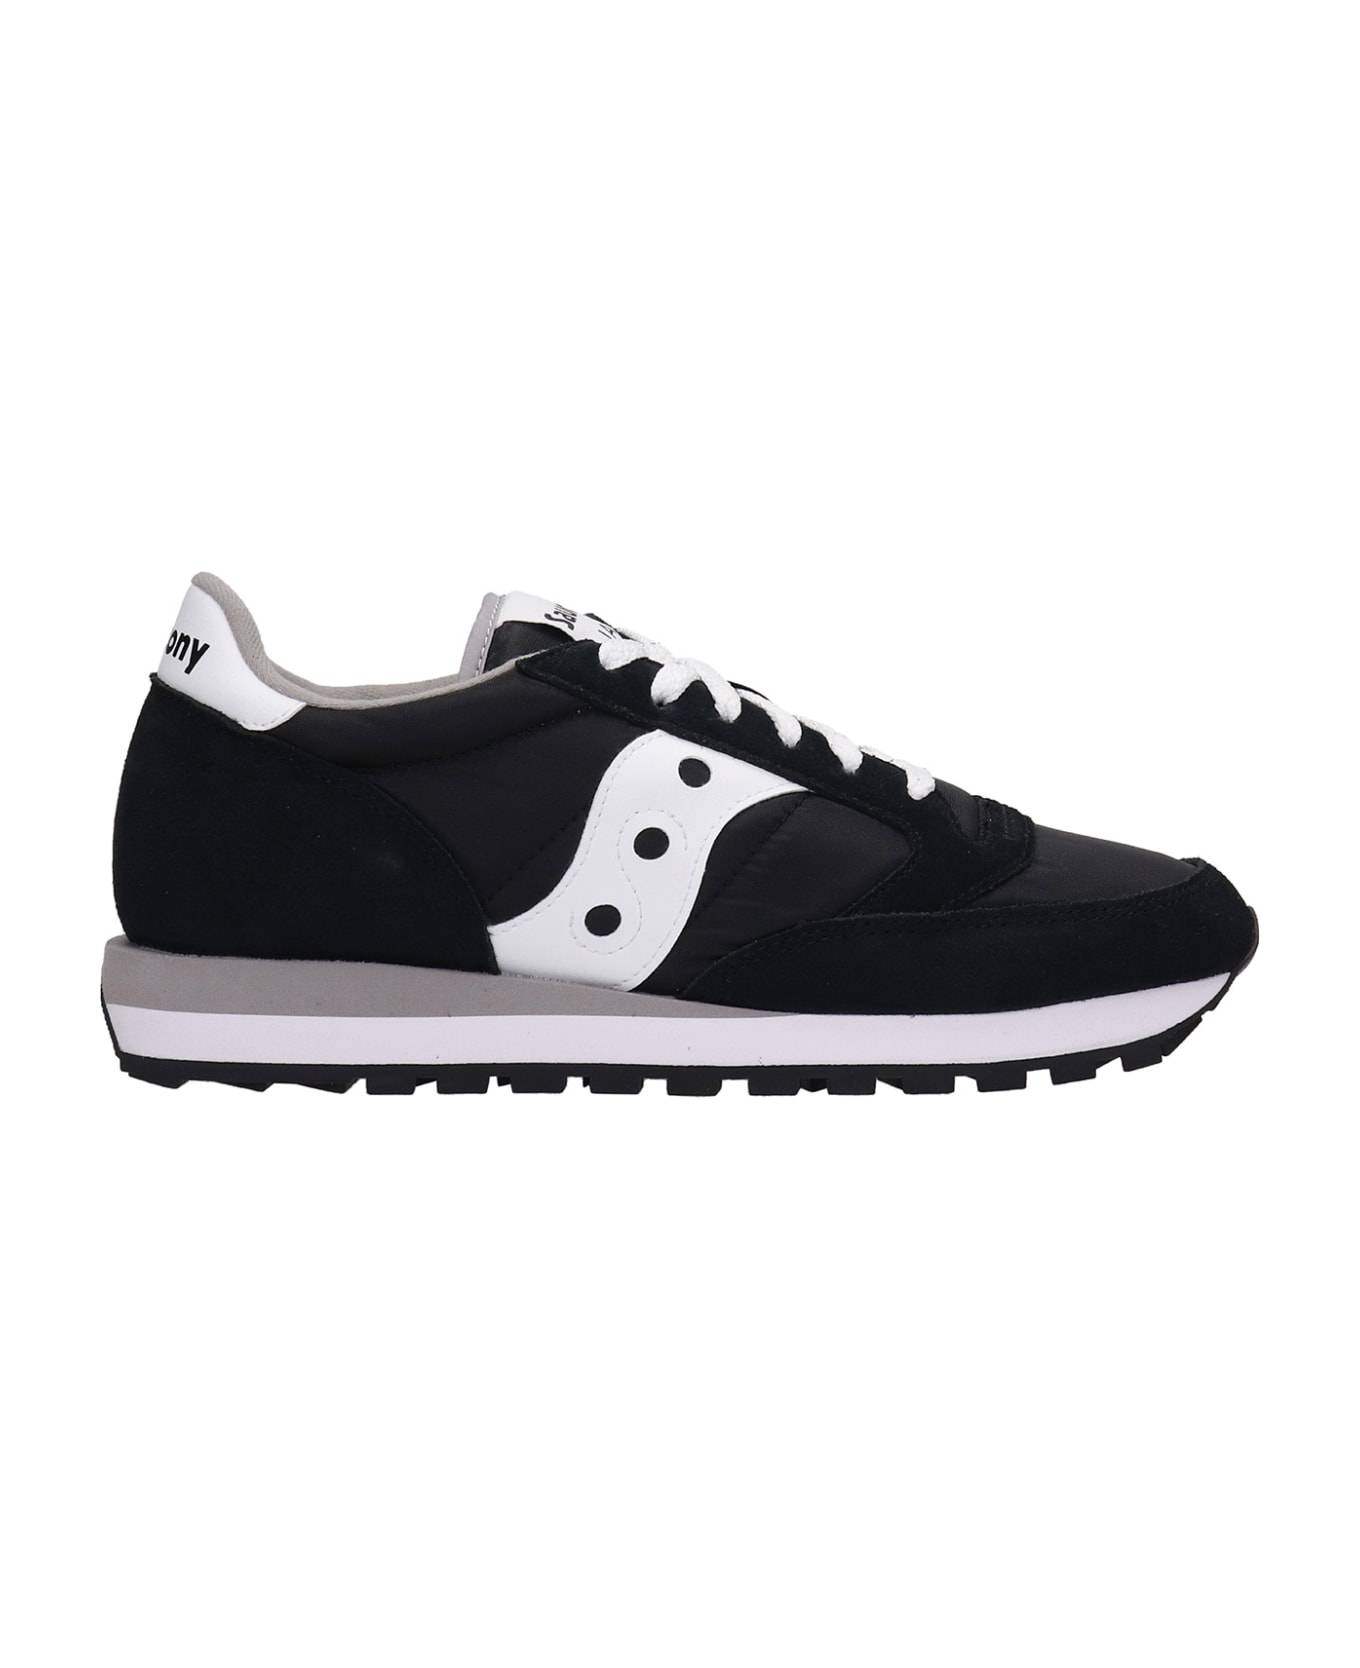 Saucony Jazz Original Sneakers In Black Suede And Fabric - Blk/wht